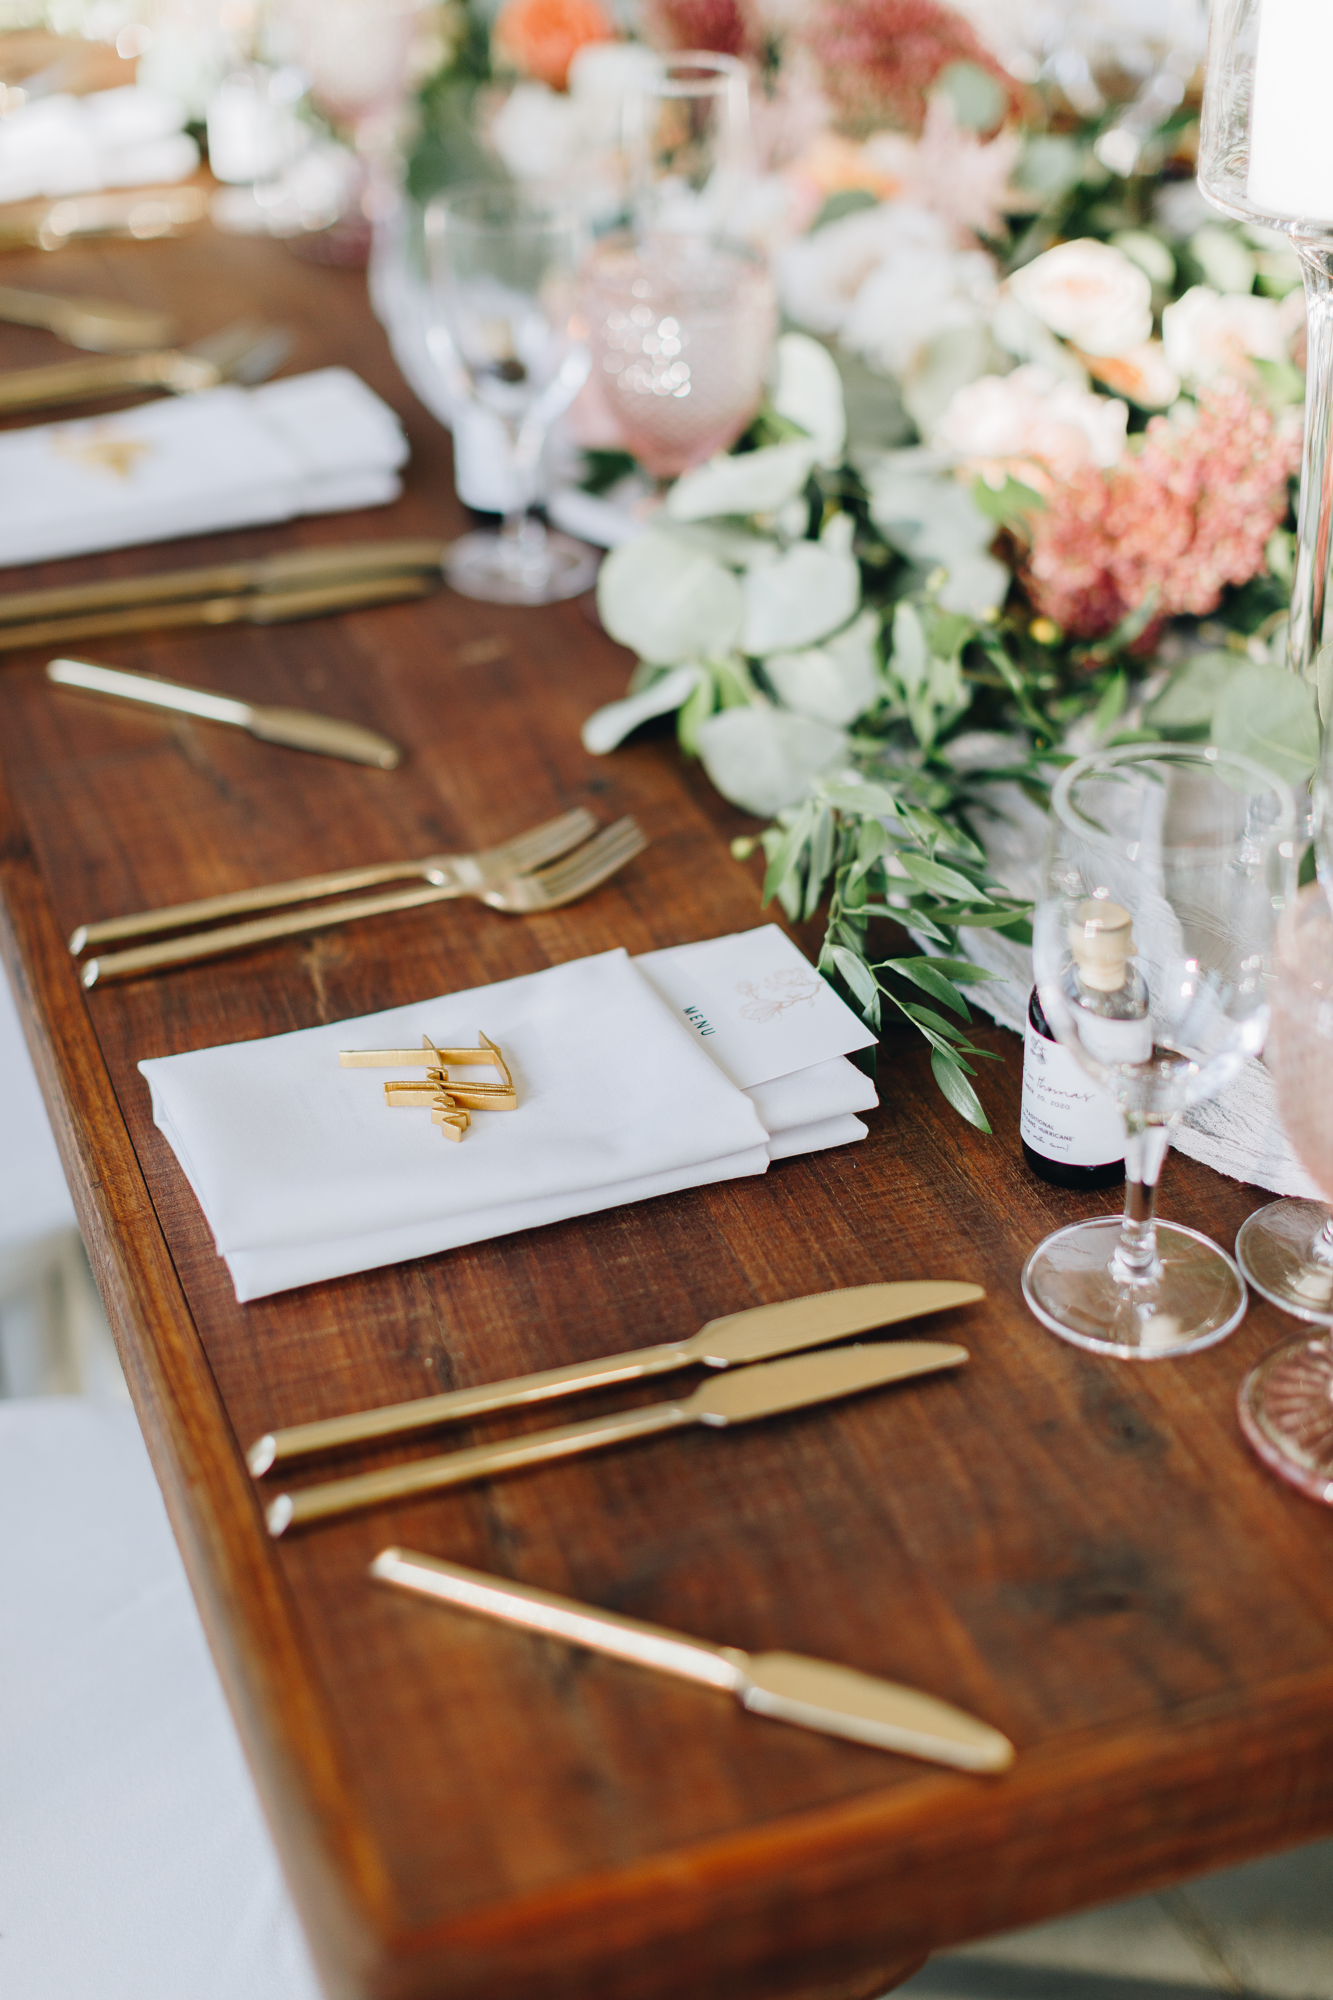 Tablescape decor at Wave Hill in New York